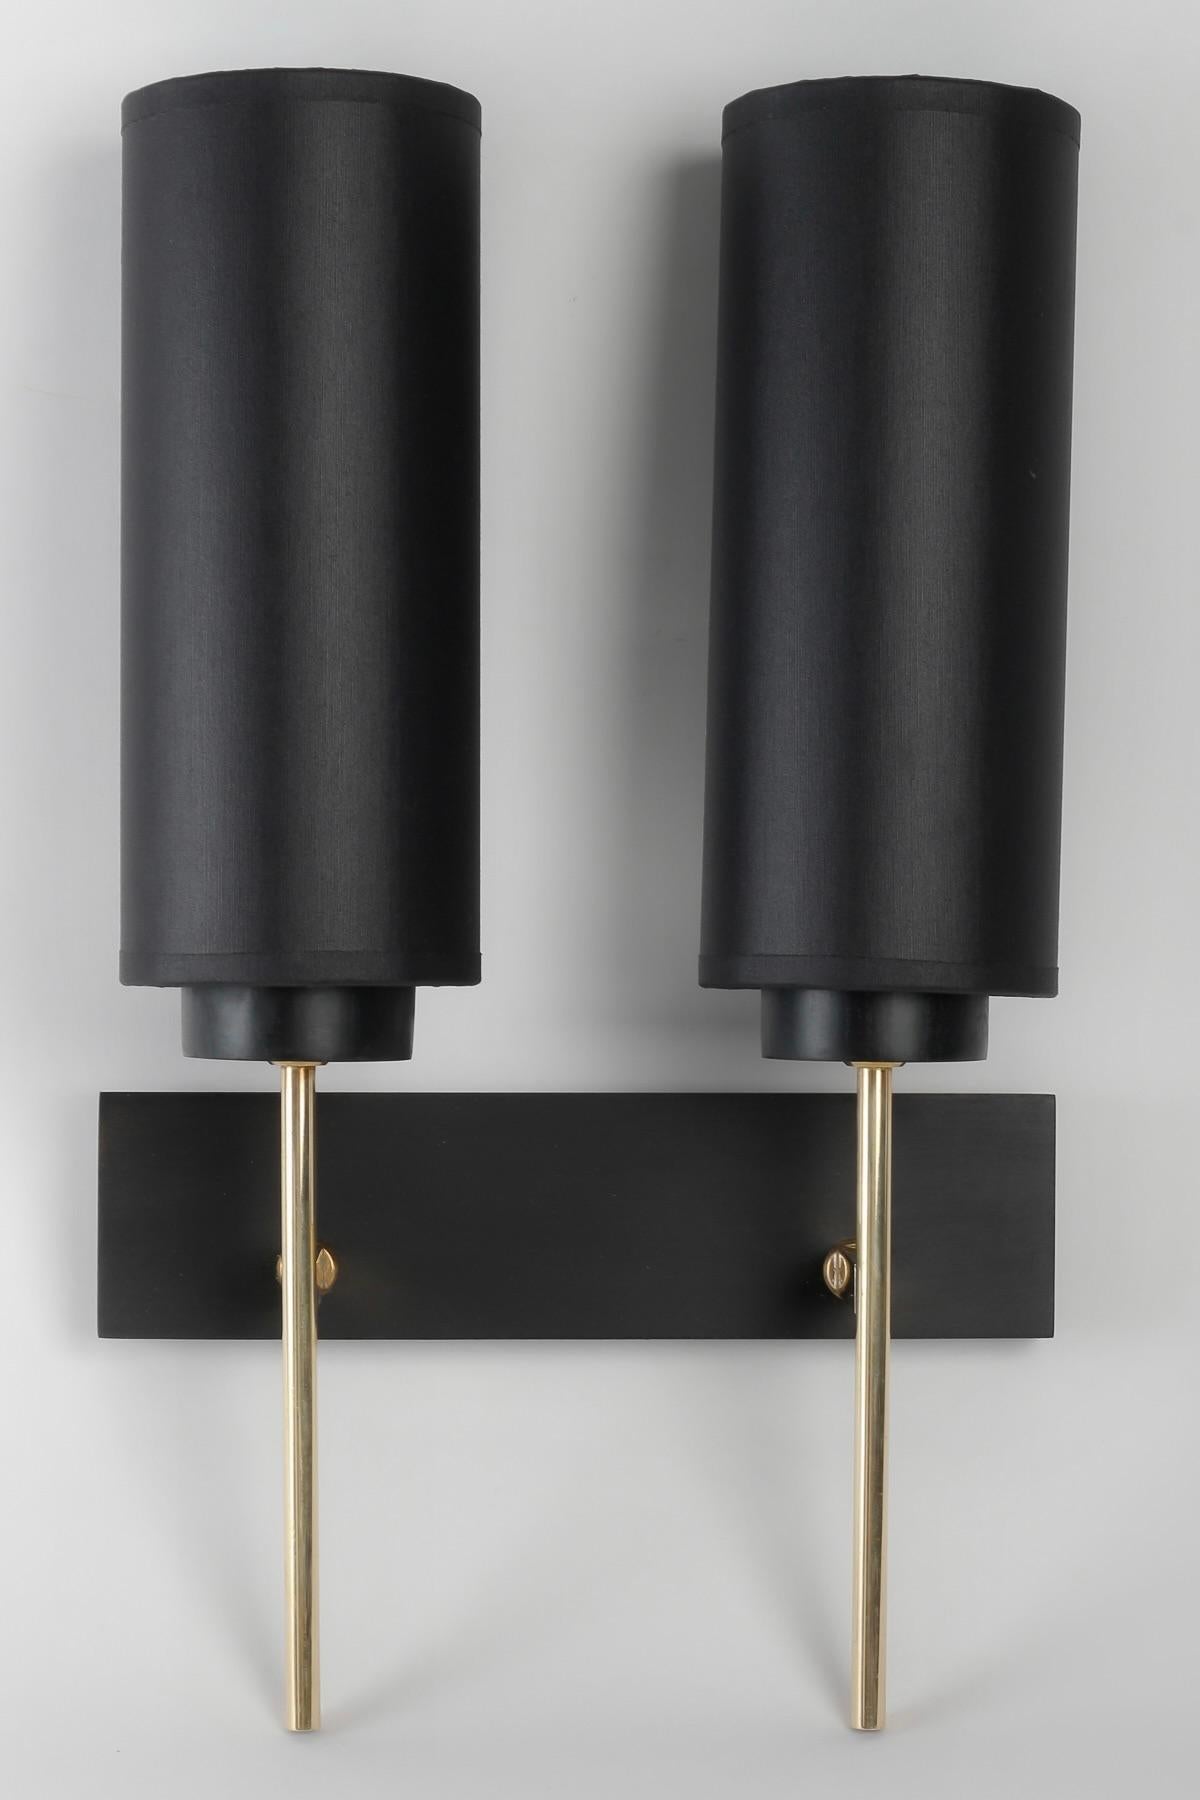 Composed of a rectangular wall bracket in blackened wood on which rest two gilded brass light arms positioned vertically on the bottom of the sconce.
On the upper part, the light arms are clad with cylindrical black cotton shades, highlighted by